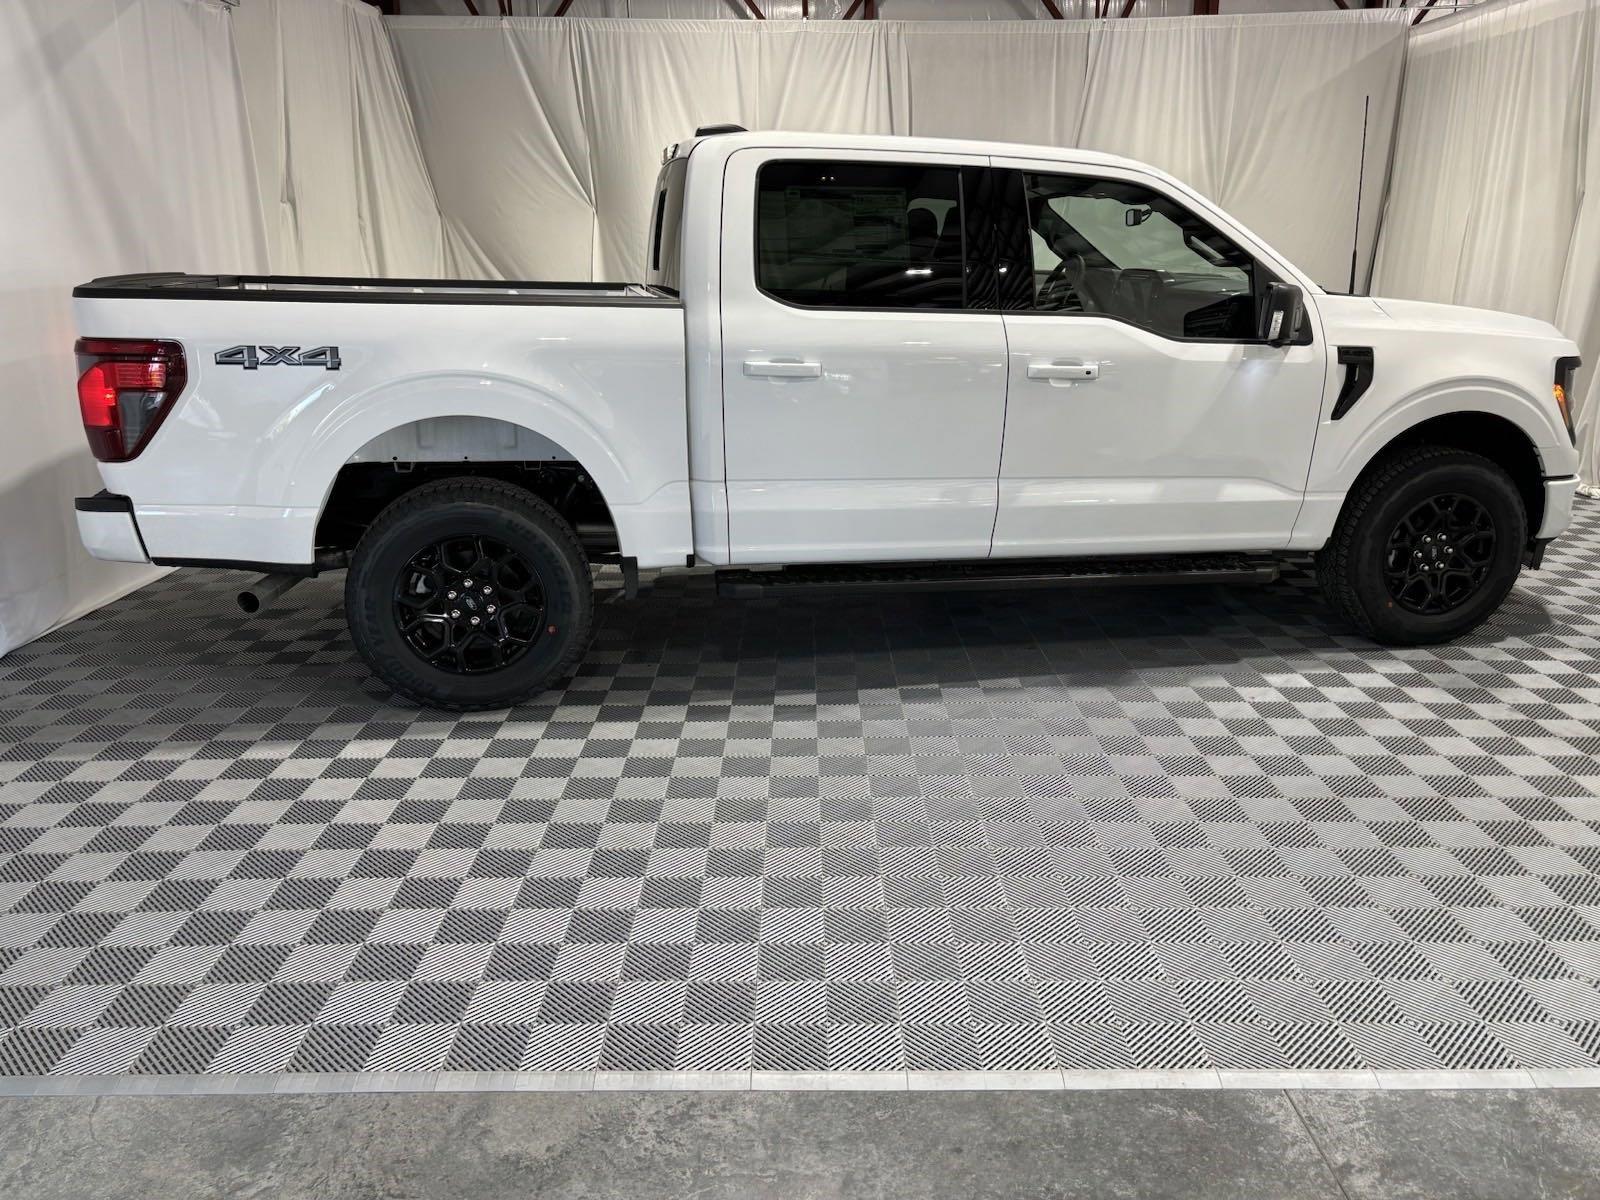 New 2024 Ford F-150 XLT Crew Cab Truck for sale in St Joseph MO